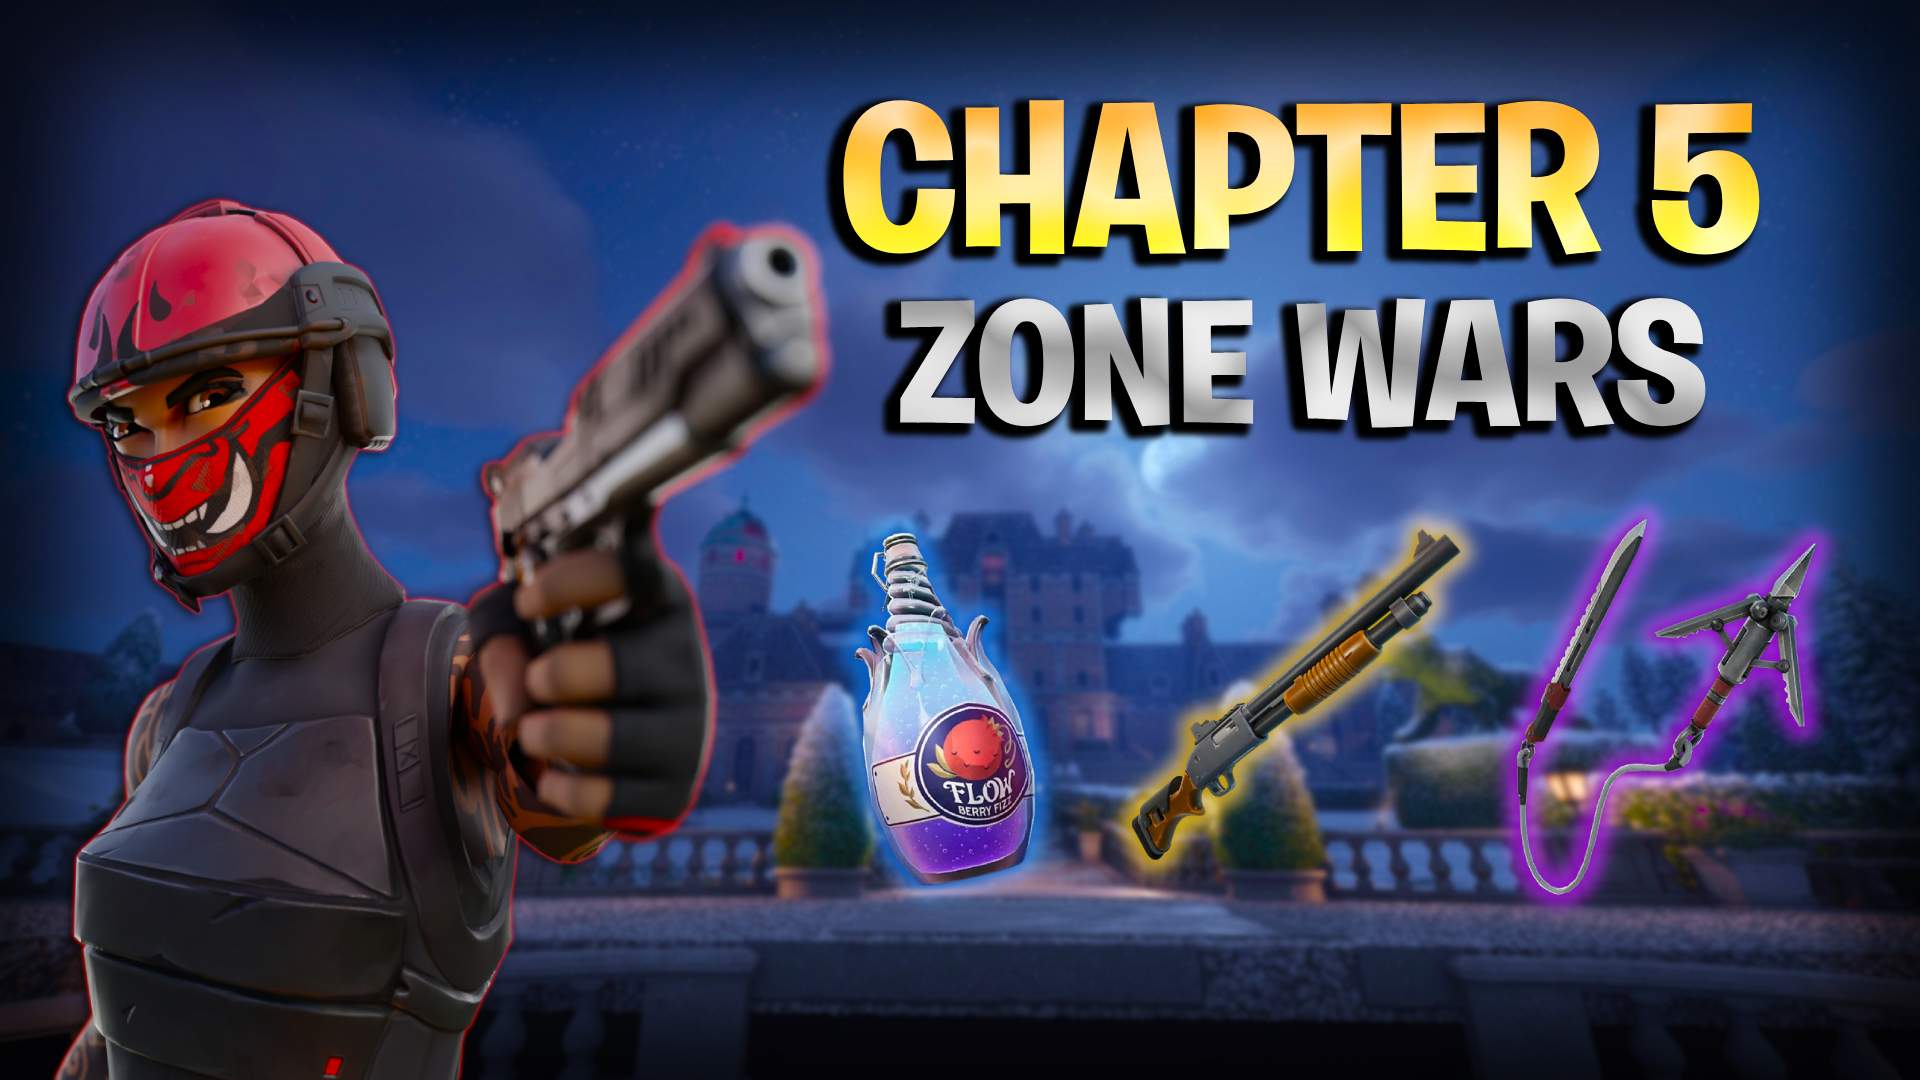 🏆 CHAPTER 5 ZONE WARS 🏆